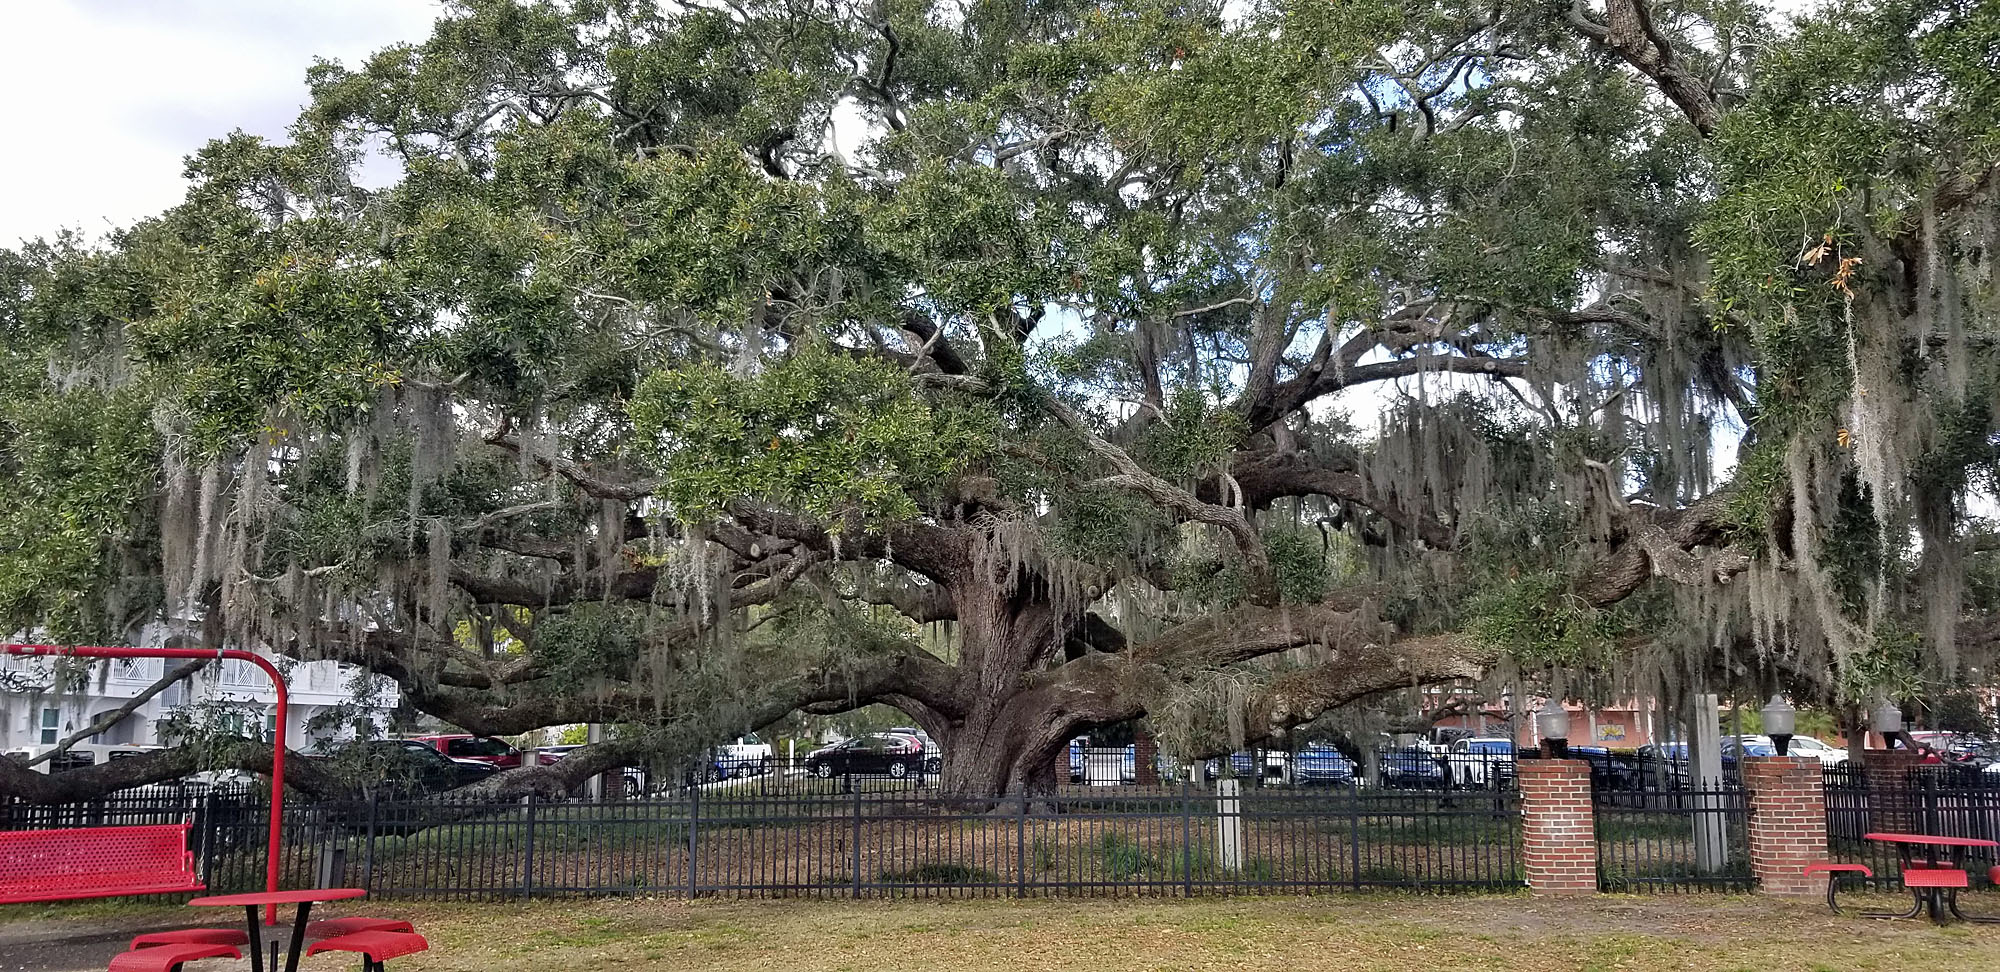 Baranoff Oak in Safety Harbor is 400 years old. (Photo by Vicki McCash Brennan)